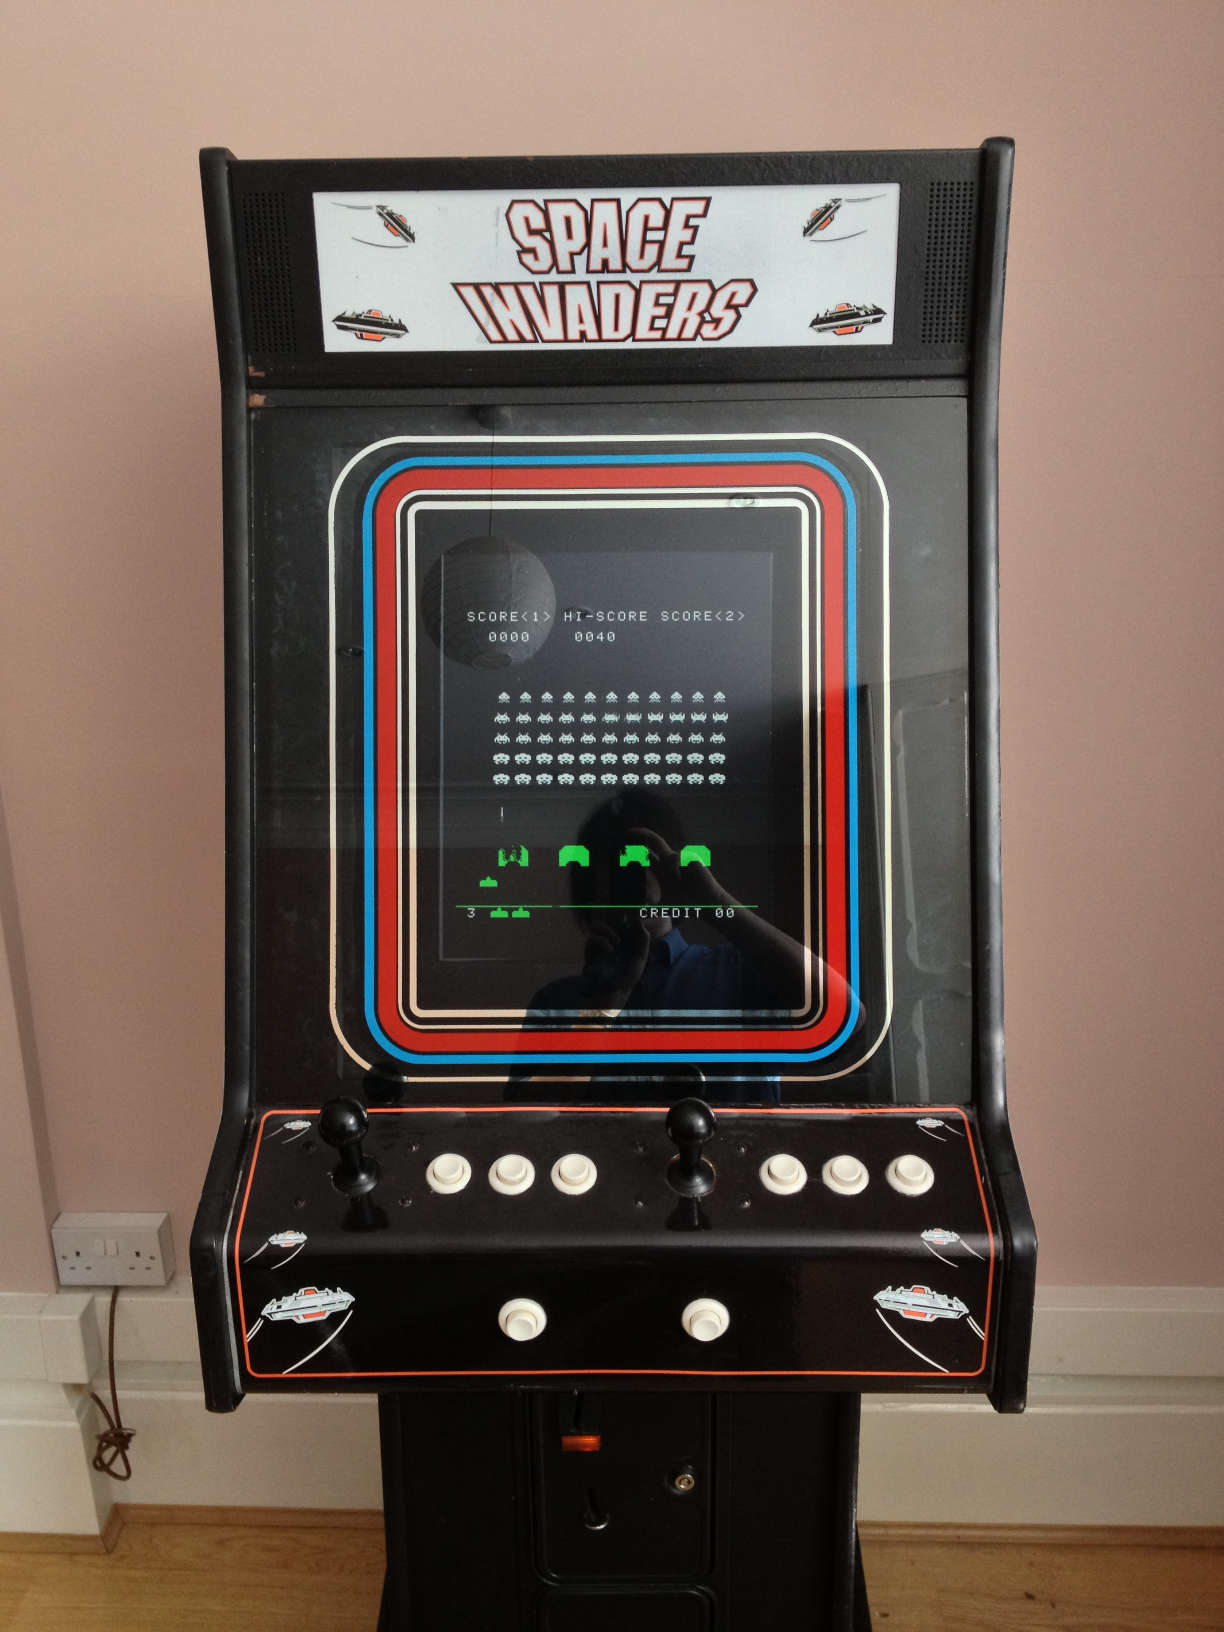 An update to yesterday’s “Robert Investigates” post – fixing the arcade.